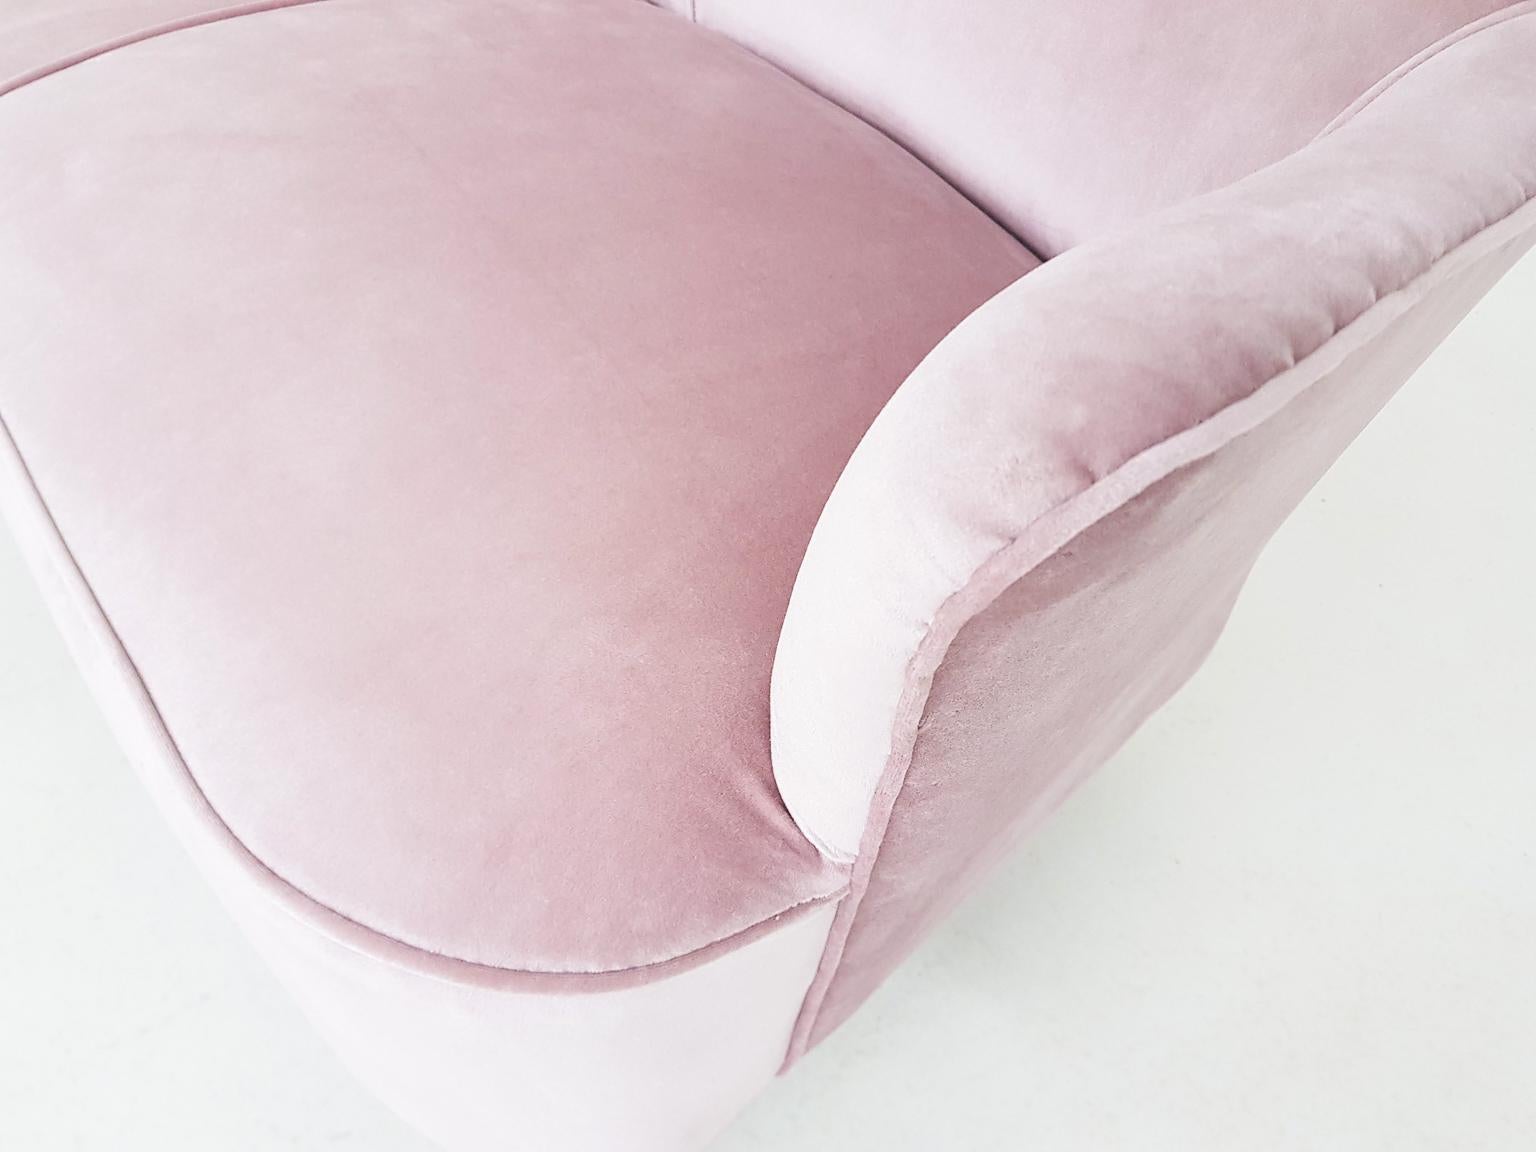 Mid-20th Century Pink Velvet Two Seat Sofa by Theo Ruth for Artifort, Dutch Modern Design 1950s